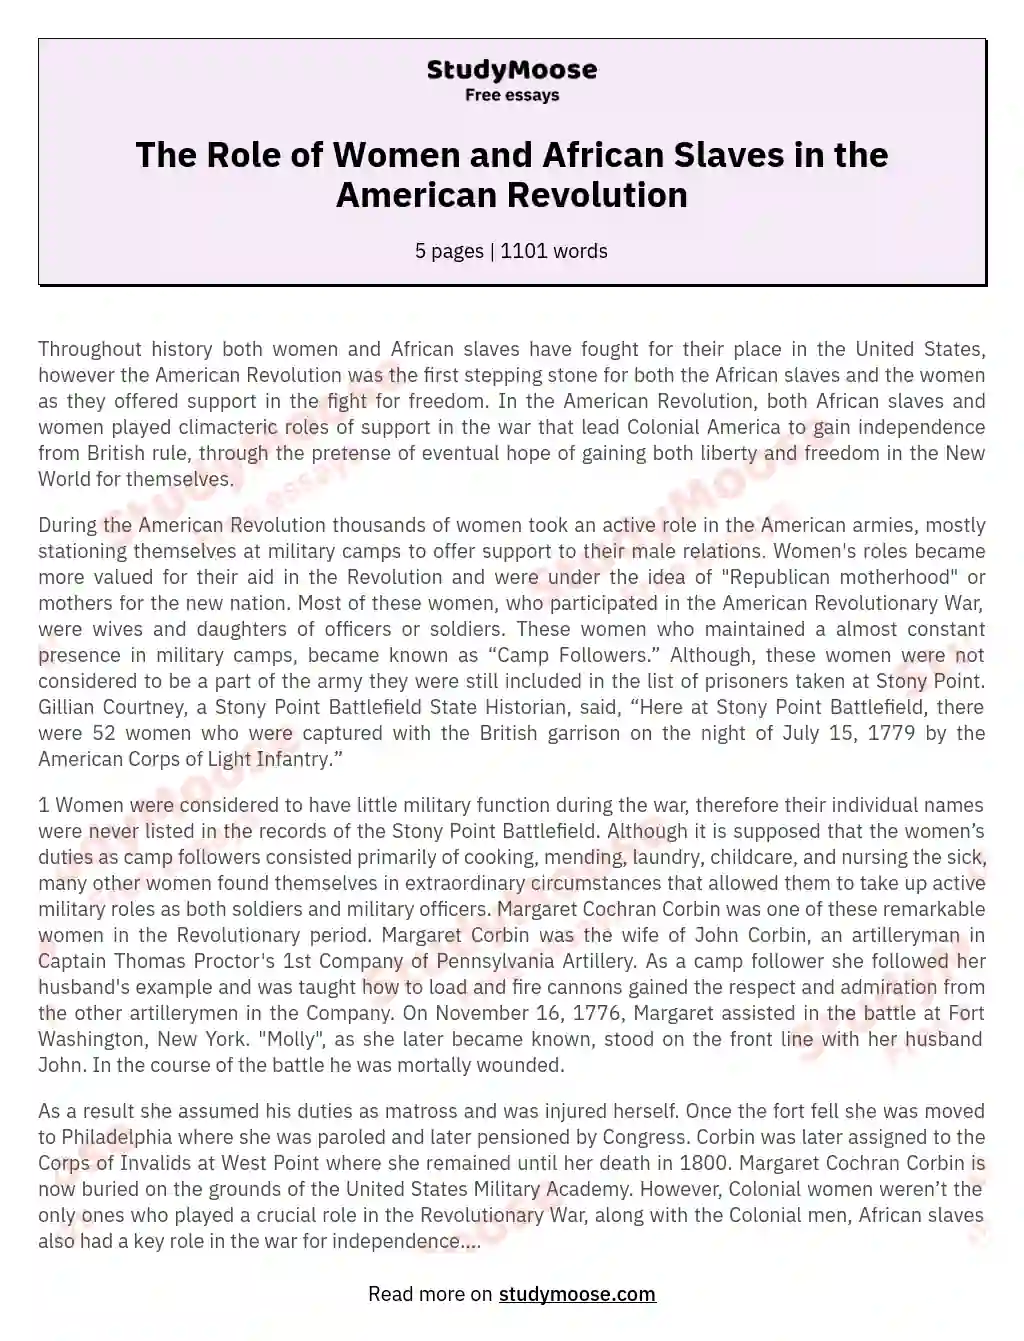 The Role of Women and African Slaves in the American Revolution